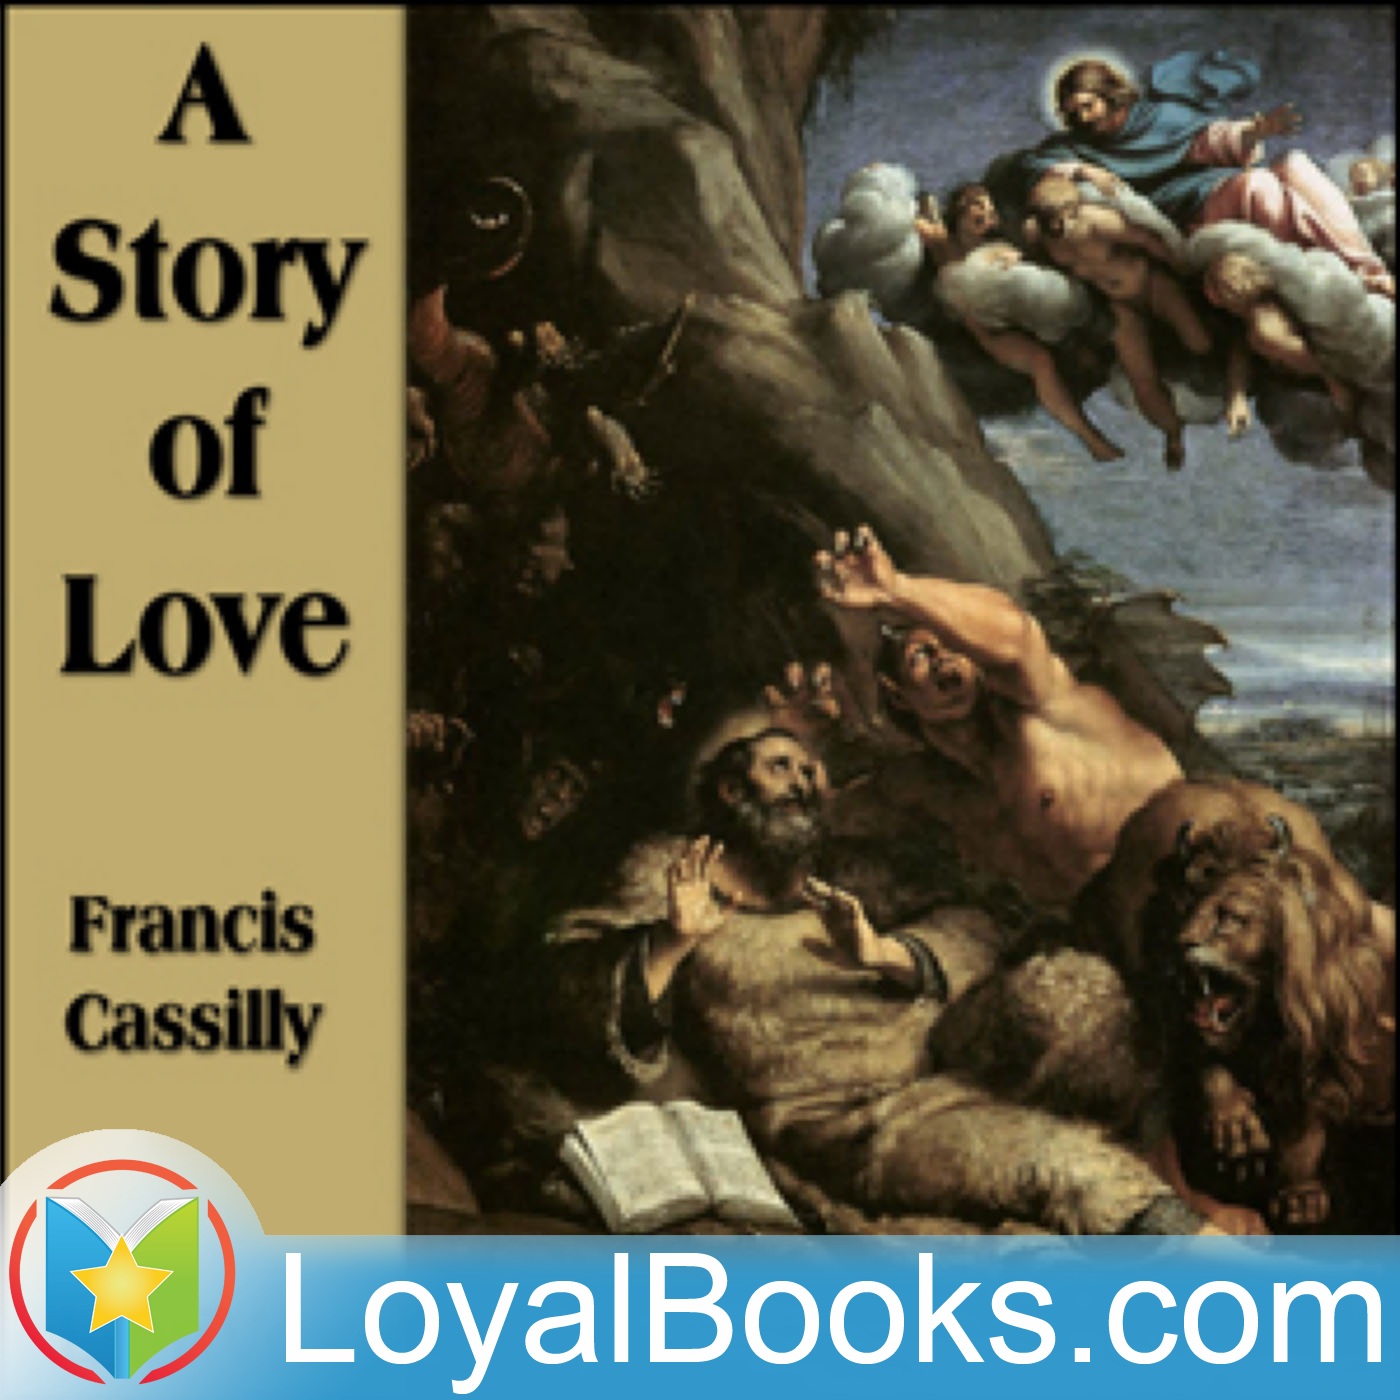 A Story of Love by Francis Cassilly